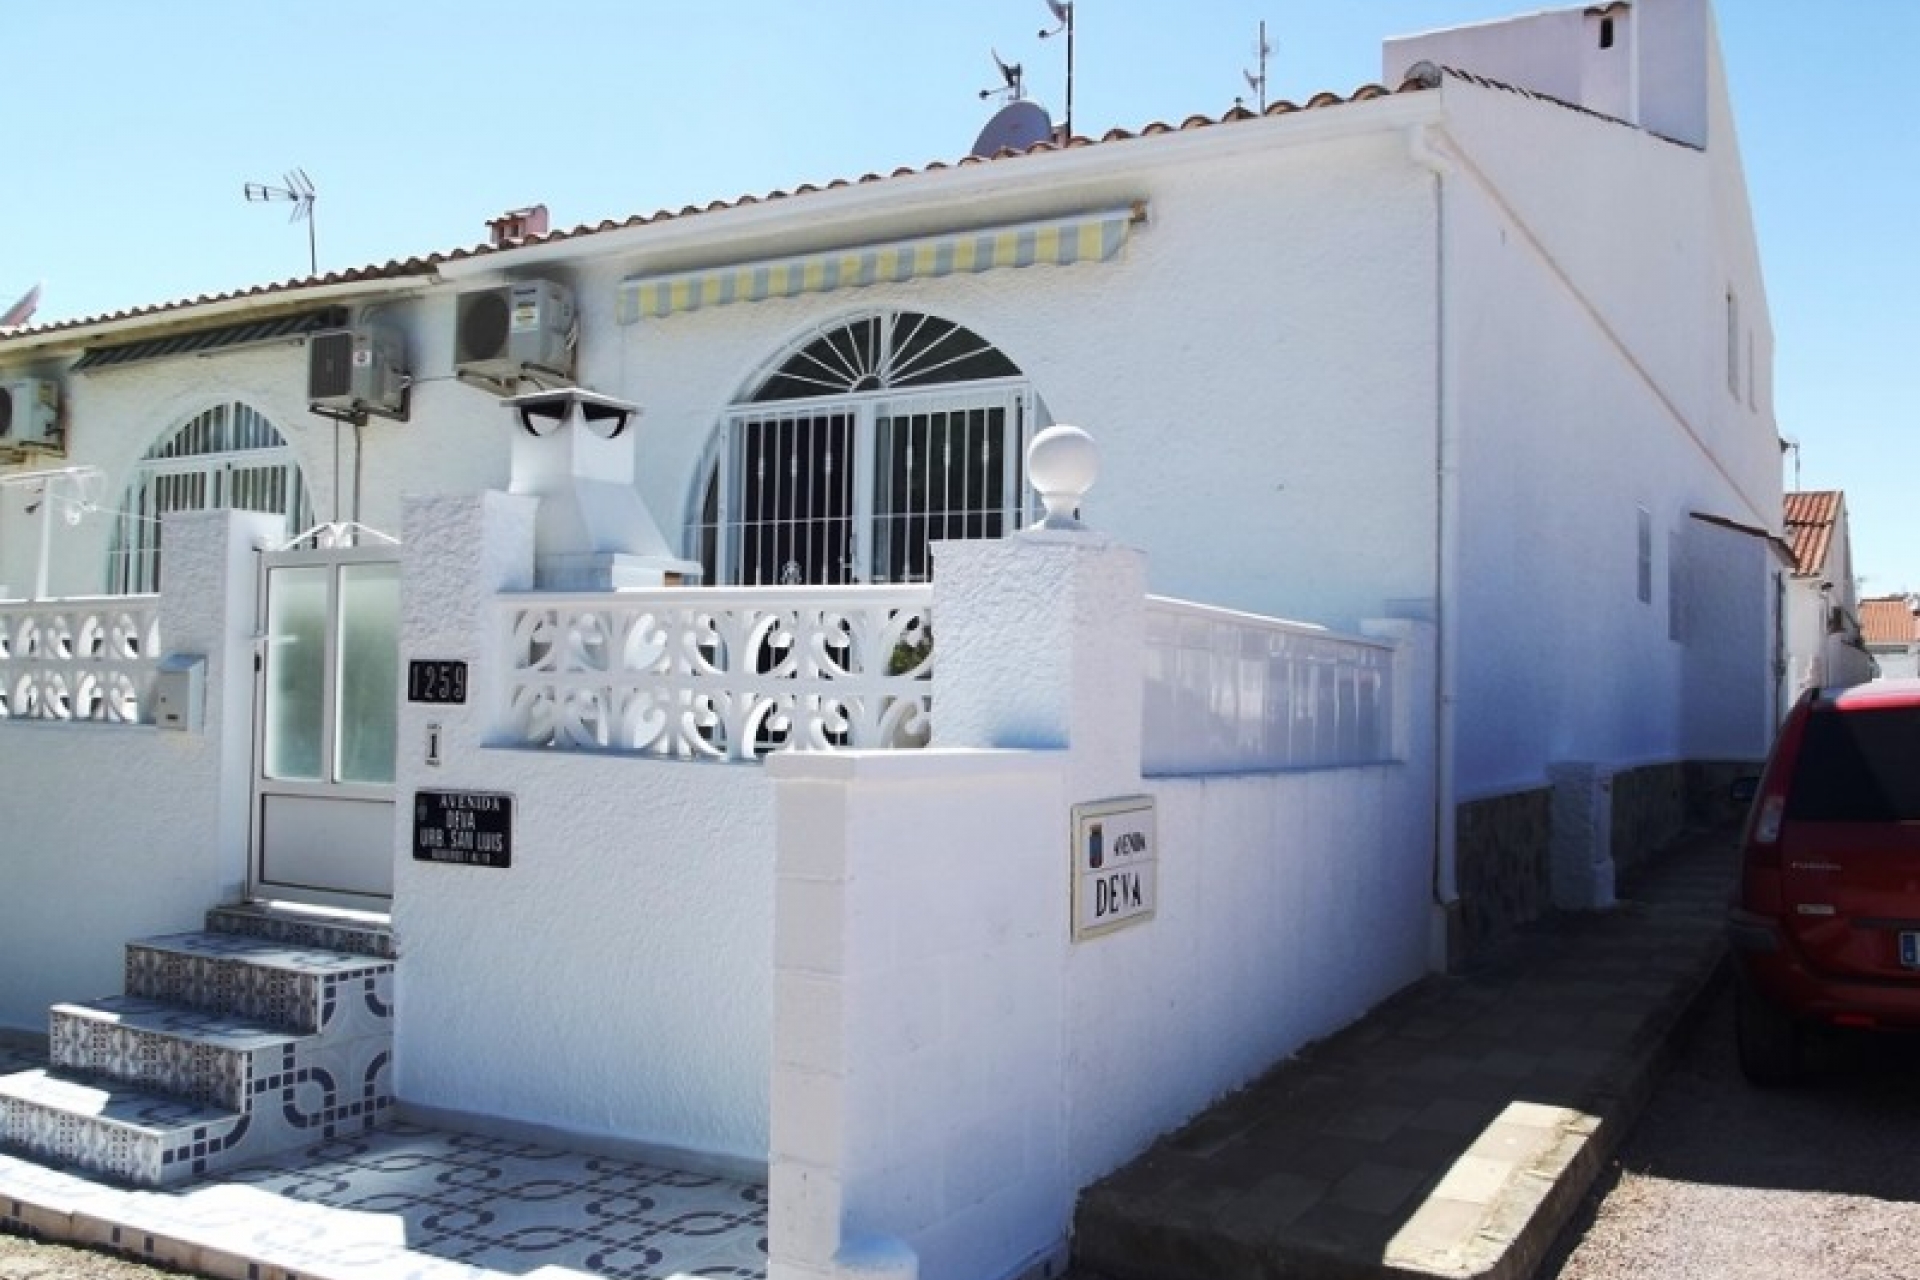 Cheap bargain property for sale Costa blanca Spain